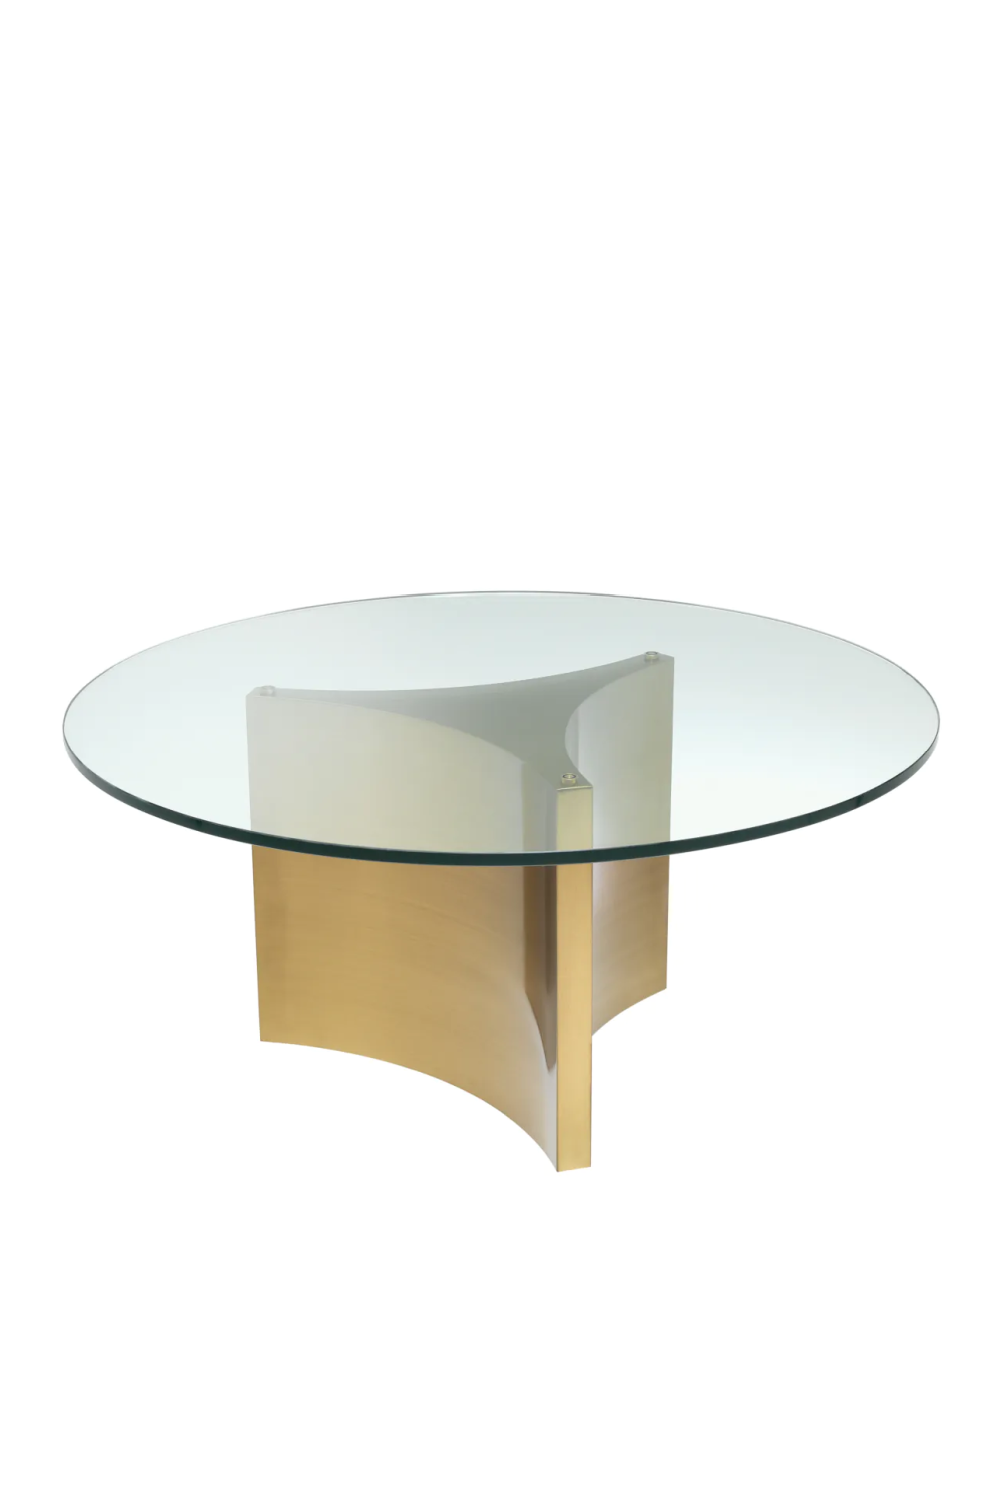 Glass Coffee Table With Oval Stools | Eichholtz Modus | Oroa.com